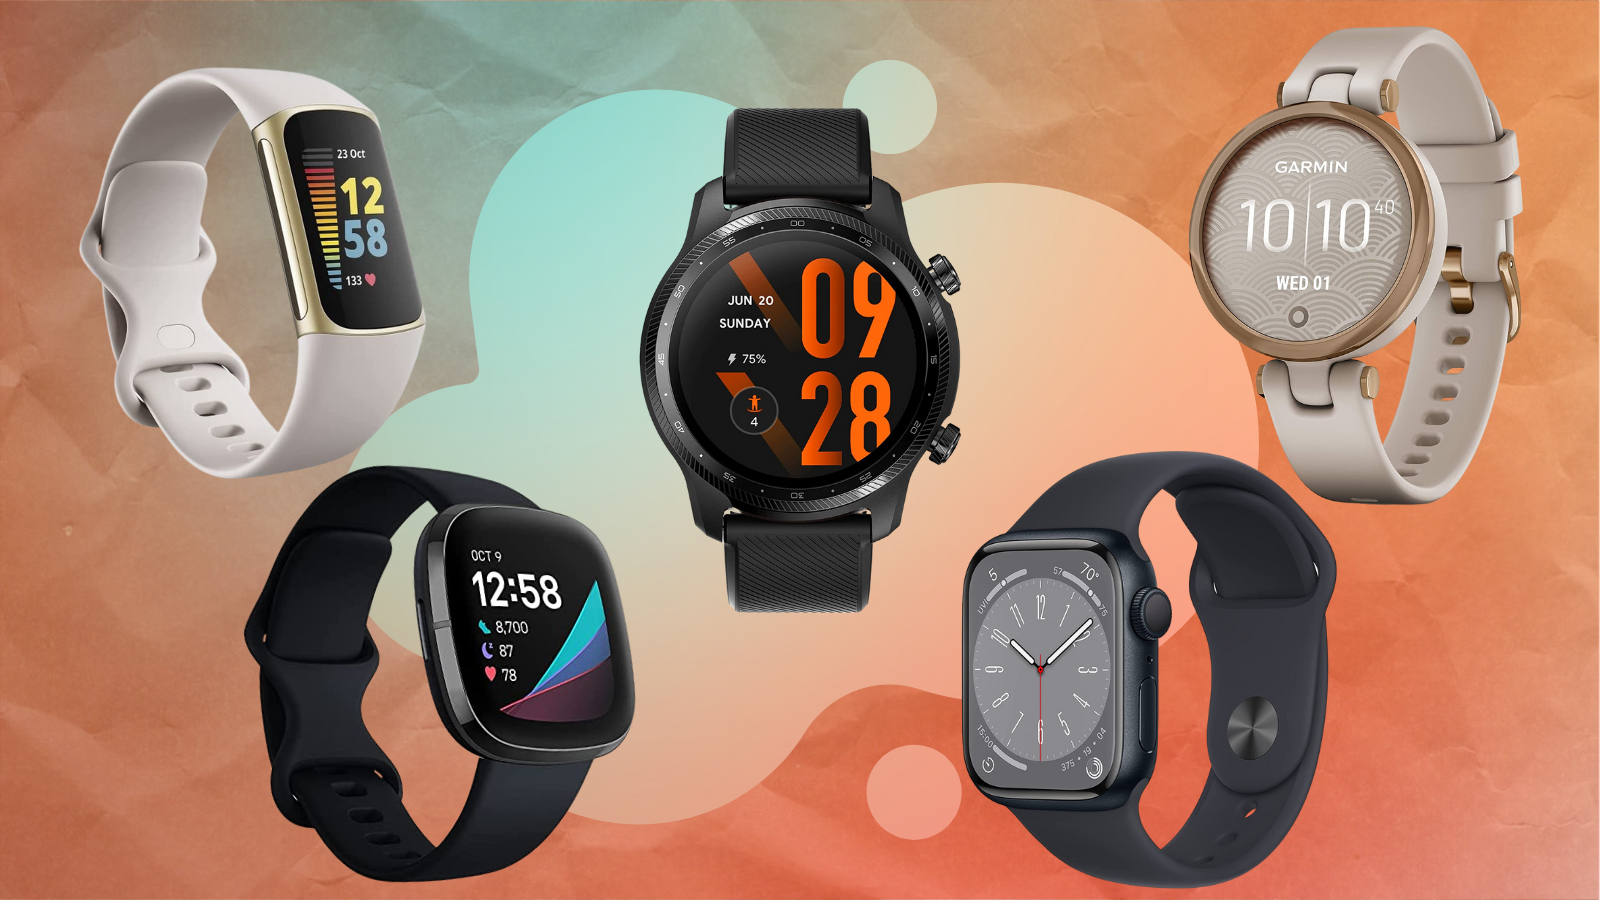 smartwatches and fitness trackers with an orange and blue background